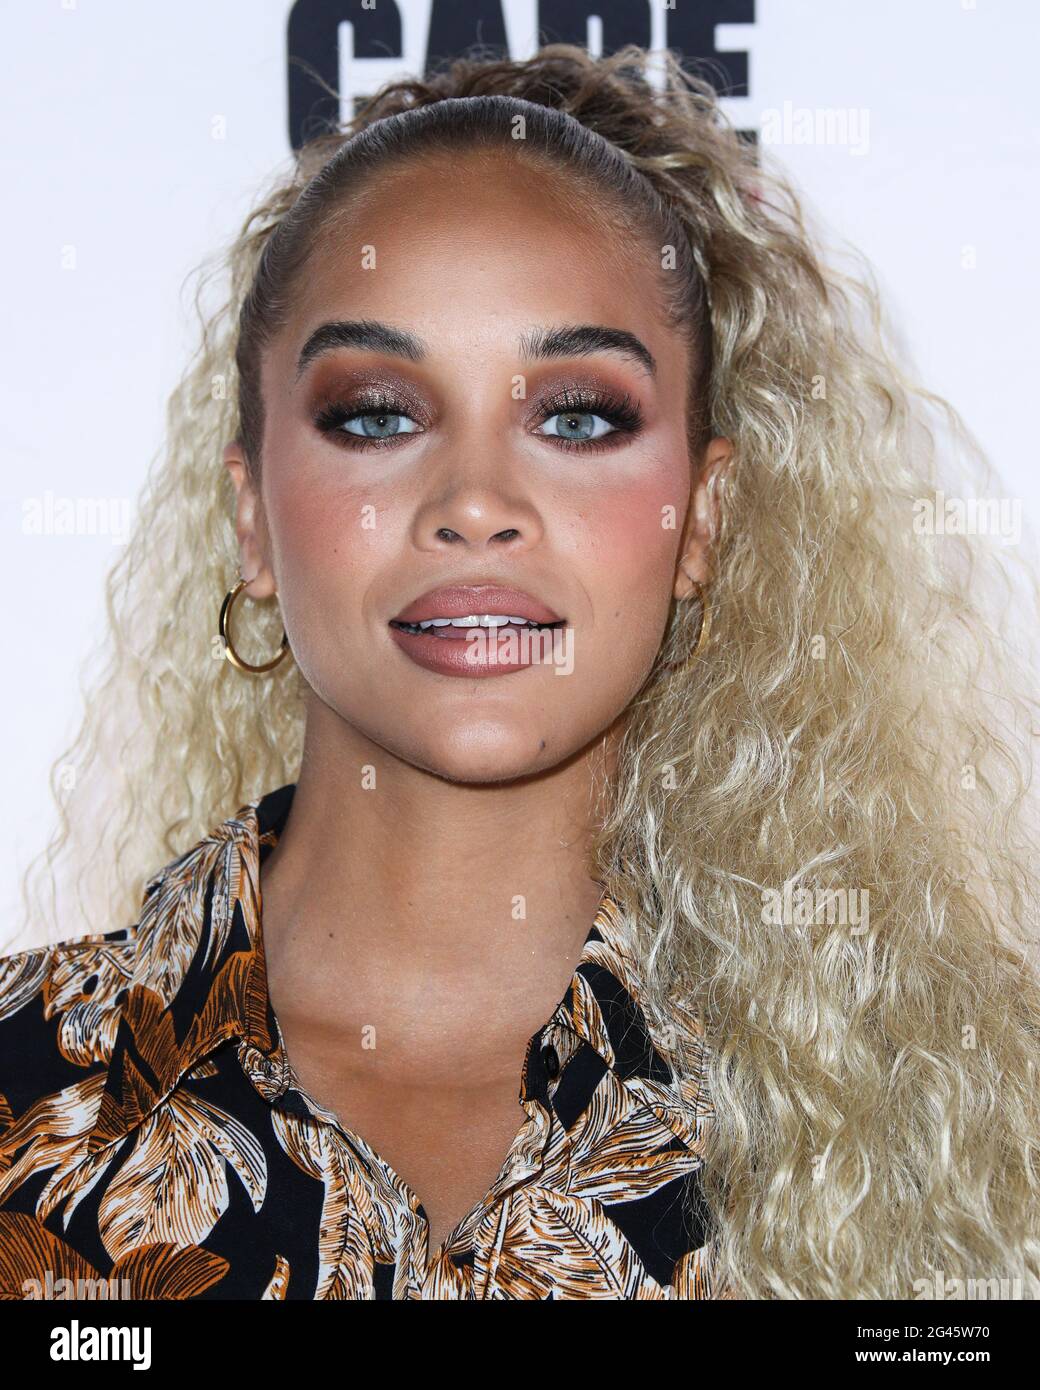 WEST HOLLYWOOD, LOS ANGELES, CALIFORNIA, USA - JUNE 18: Model Jasmine Sanders arrives at the UOMA Beauty Pride Month And Juneteenth Celebration Launch Event held at Hyde Sunset Kitchen + Cocktails on June 18, 2021 in West Hollywood, Los Angeles, California, USA. (Photo by Xavier Collin/Image Press Agency) Stock Photo